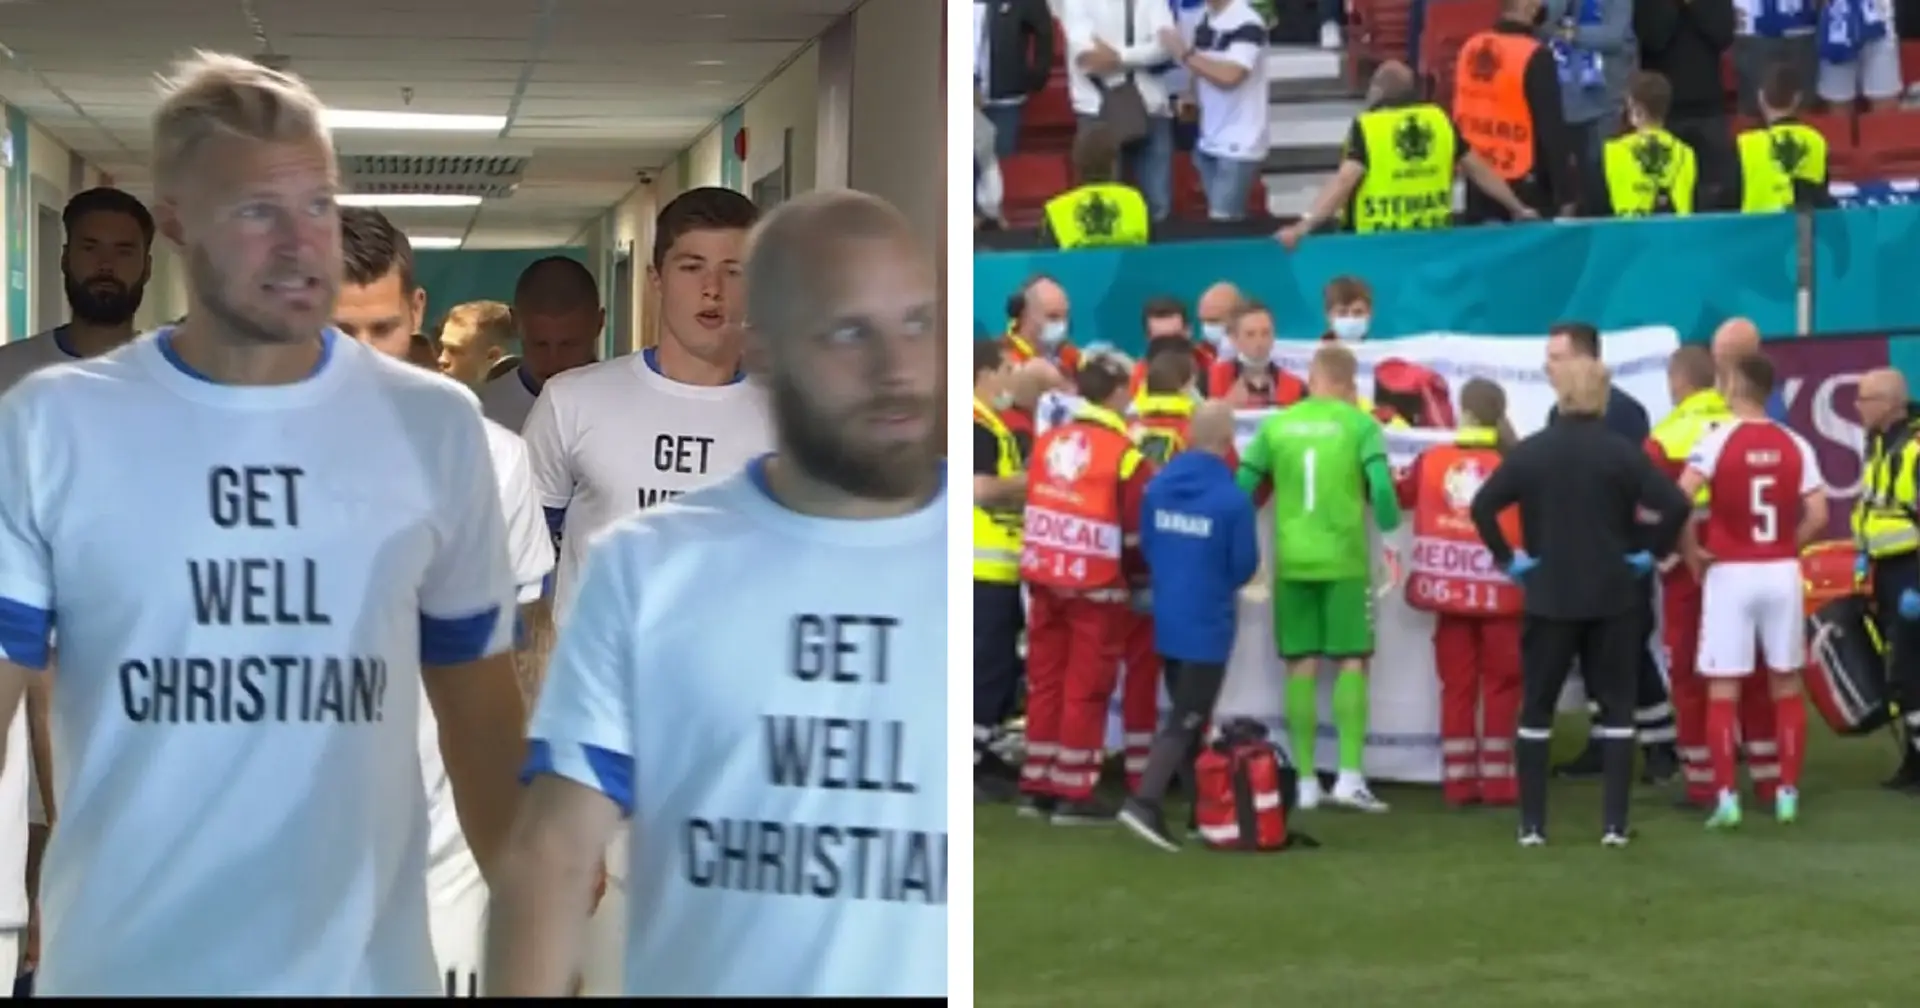 Finland team spotted wearing 'get well Christian' shirts during warm-up vs Russia 